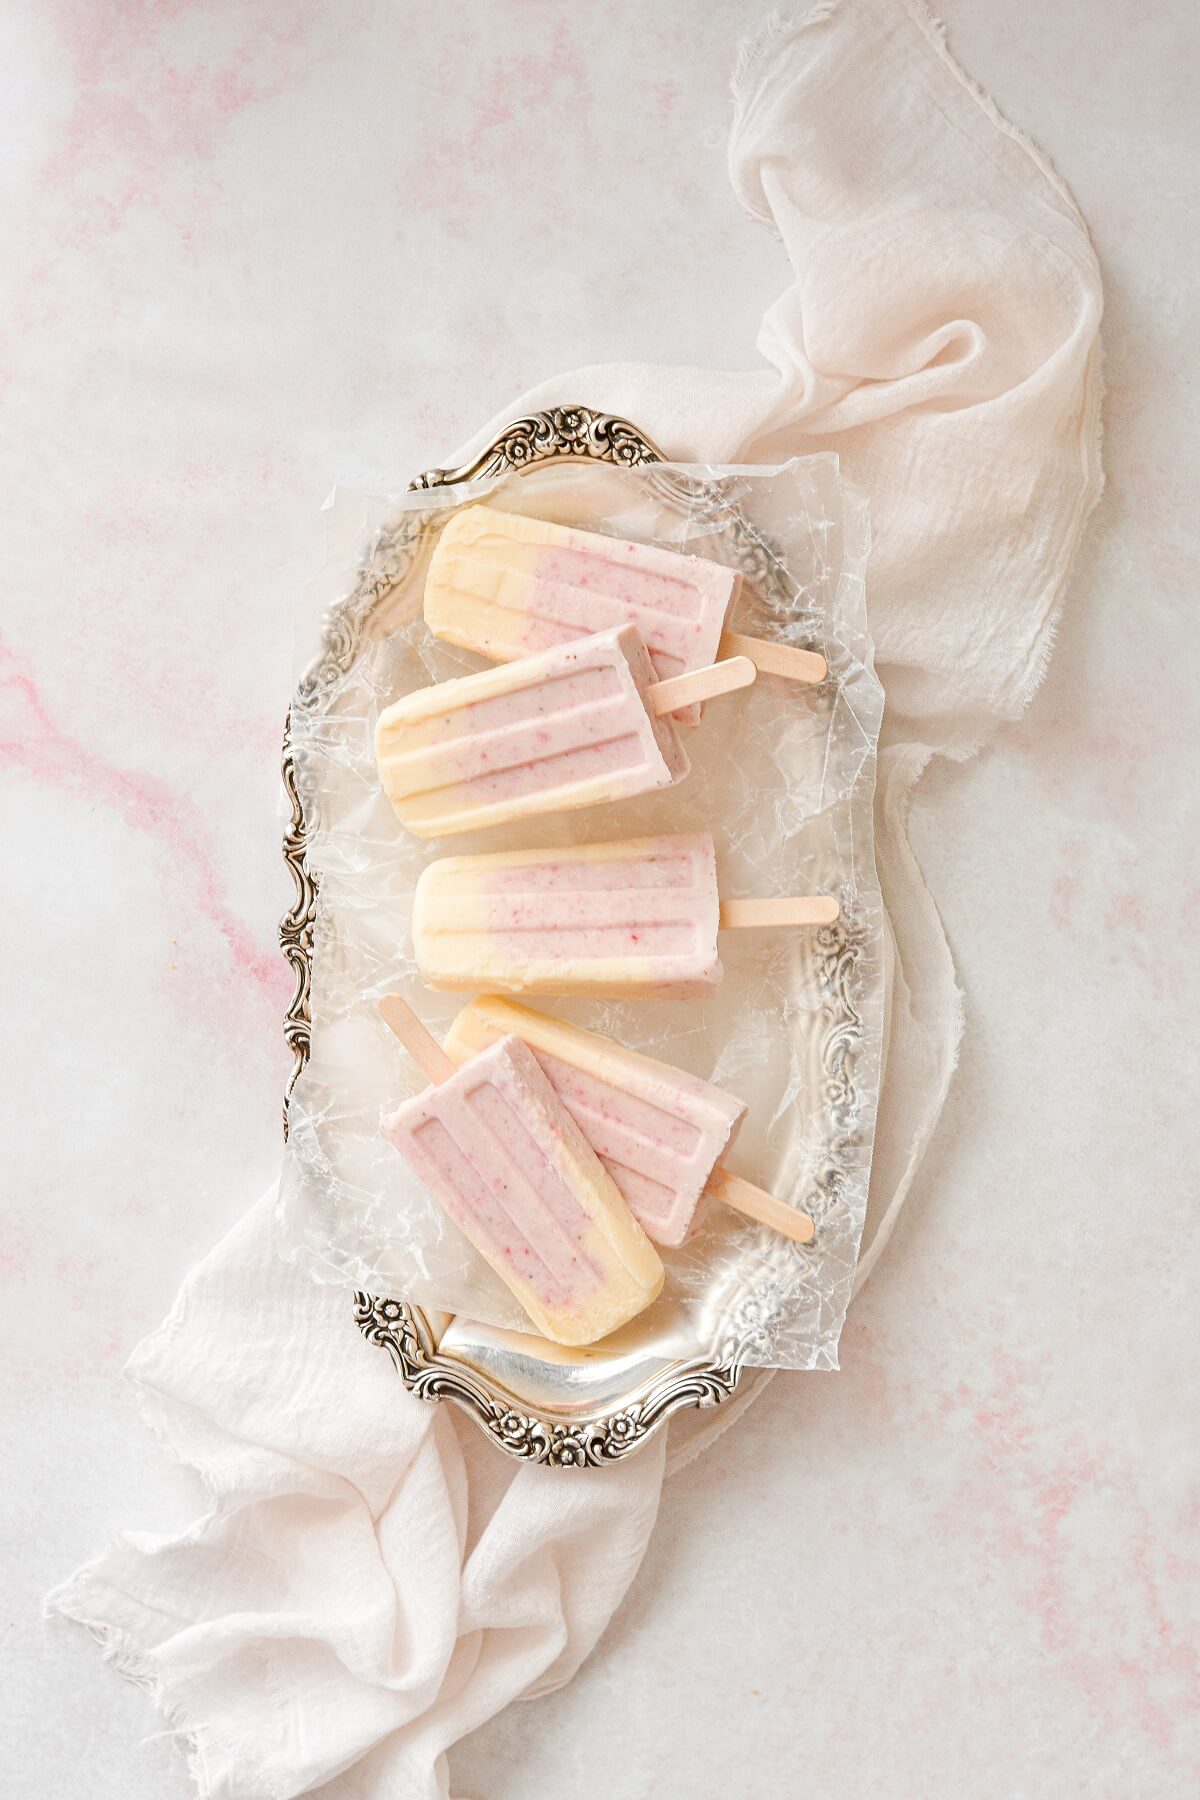 Strawberry orange creamsicles, arranged on a silver platter.